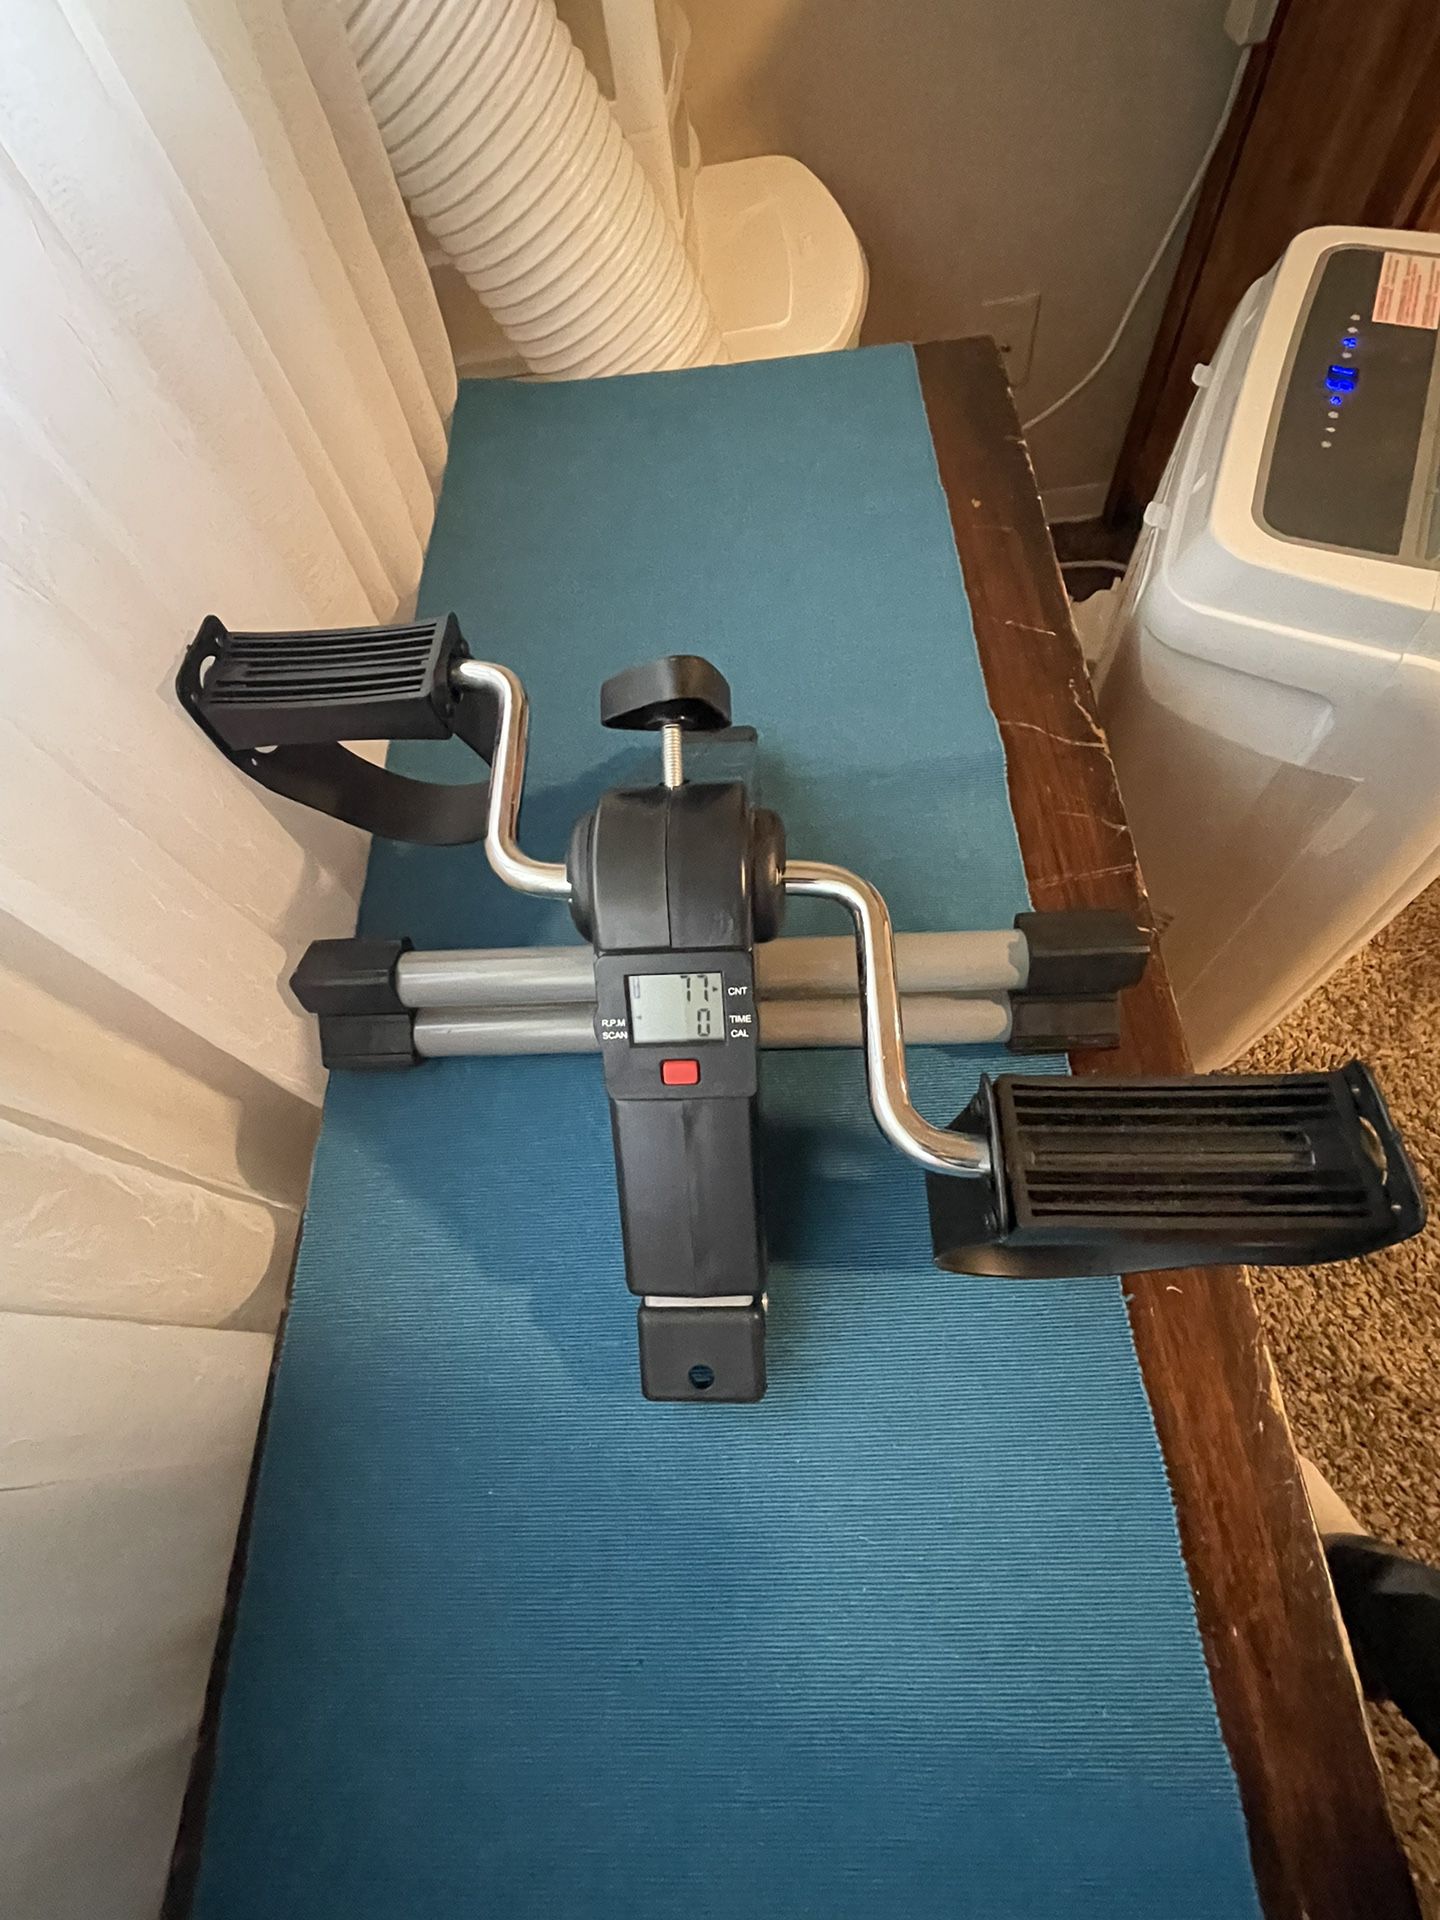 Exercise pedals. 